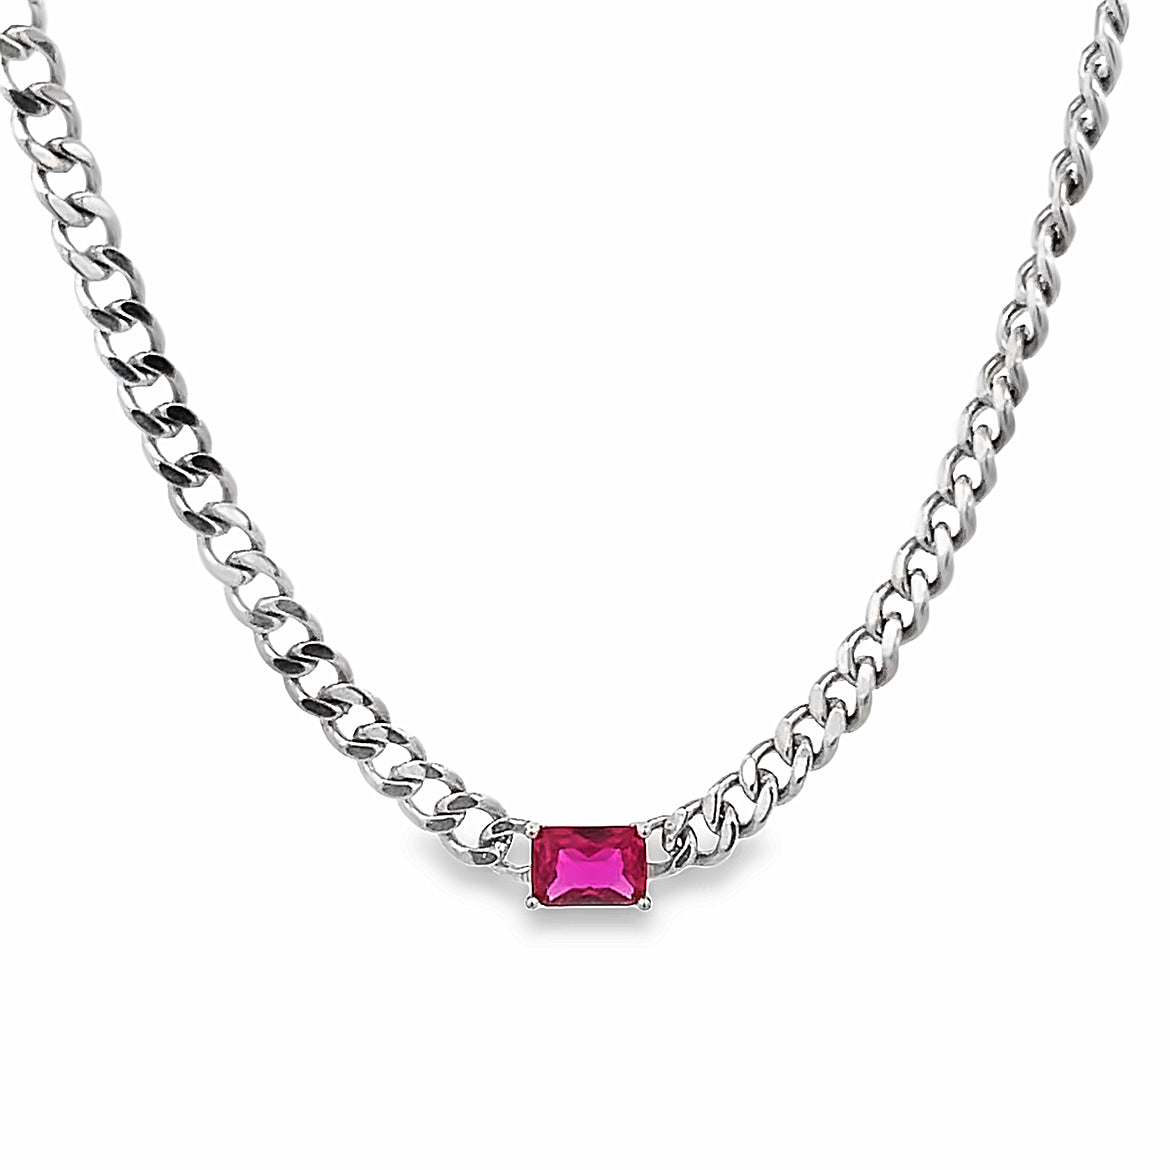 925 SILVER PLATED CHAIN LINKS WITH PINK CRYSTAL